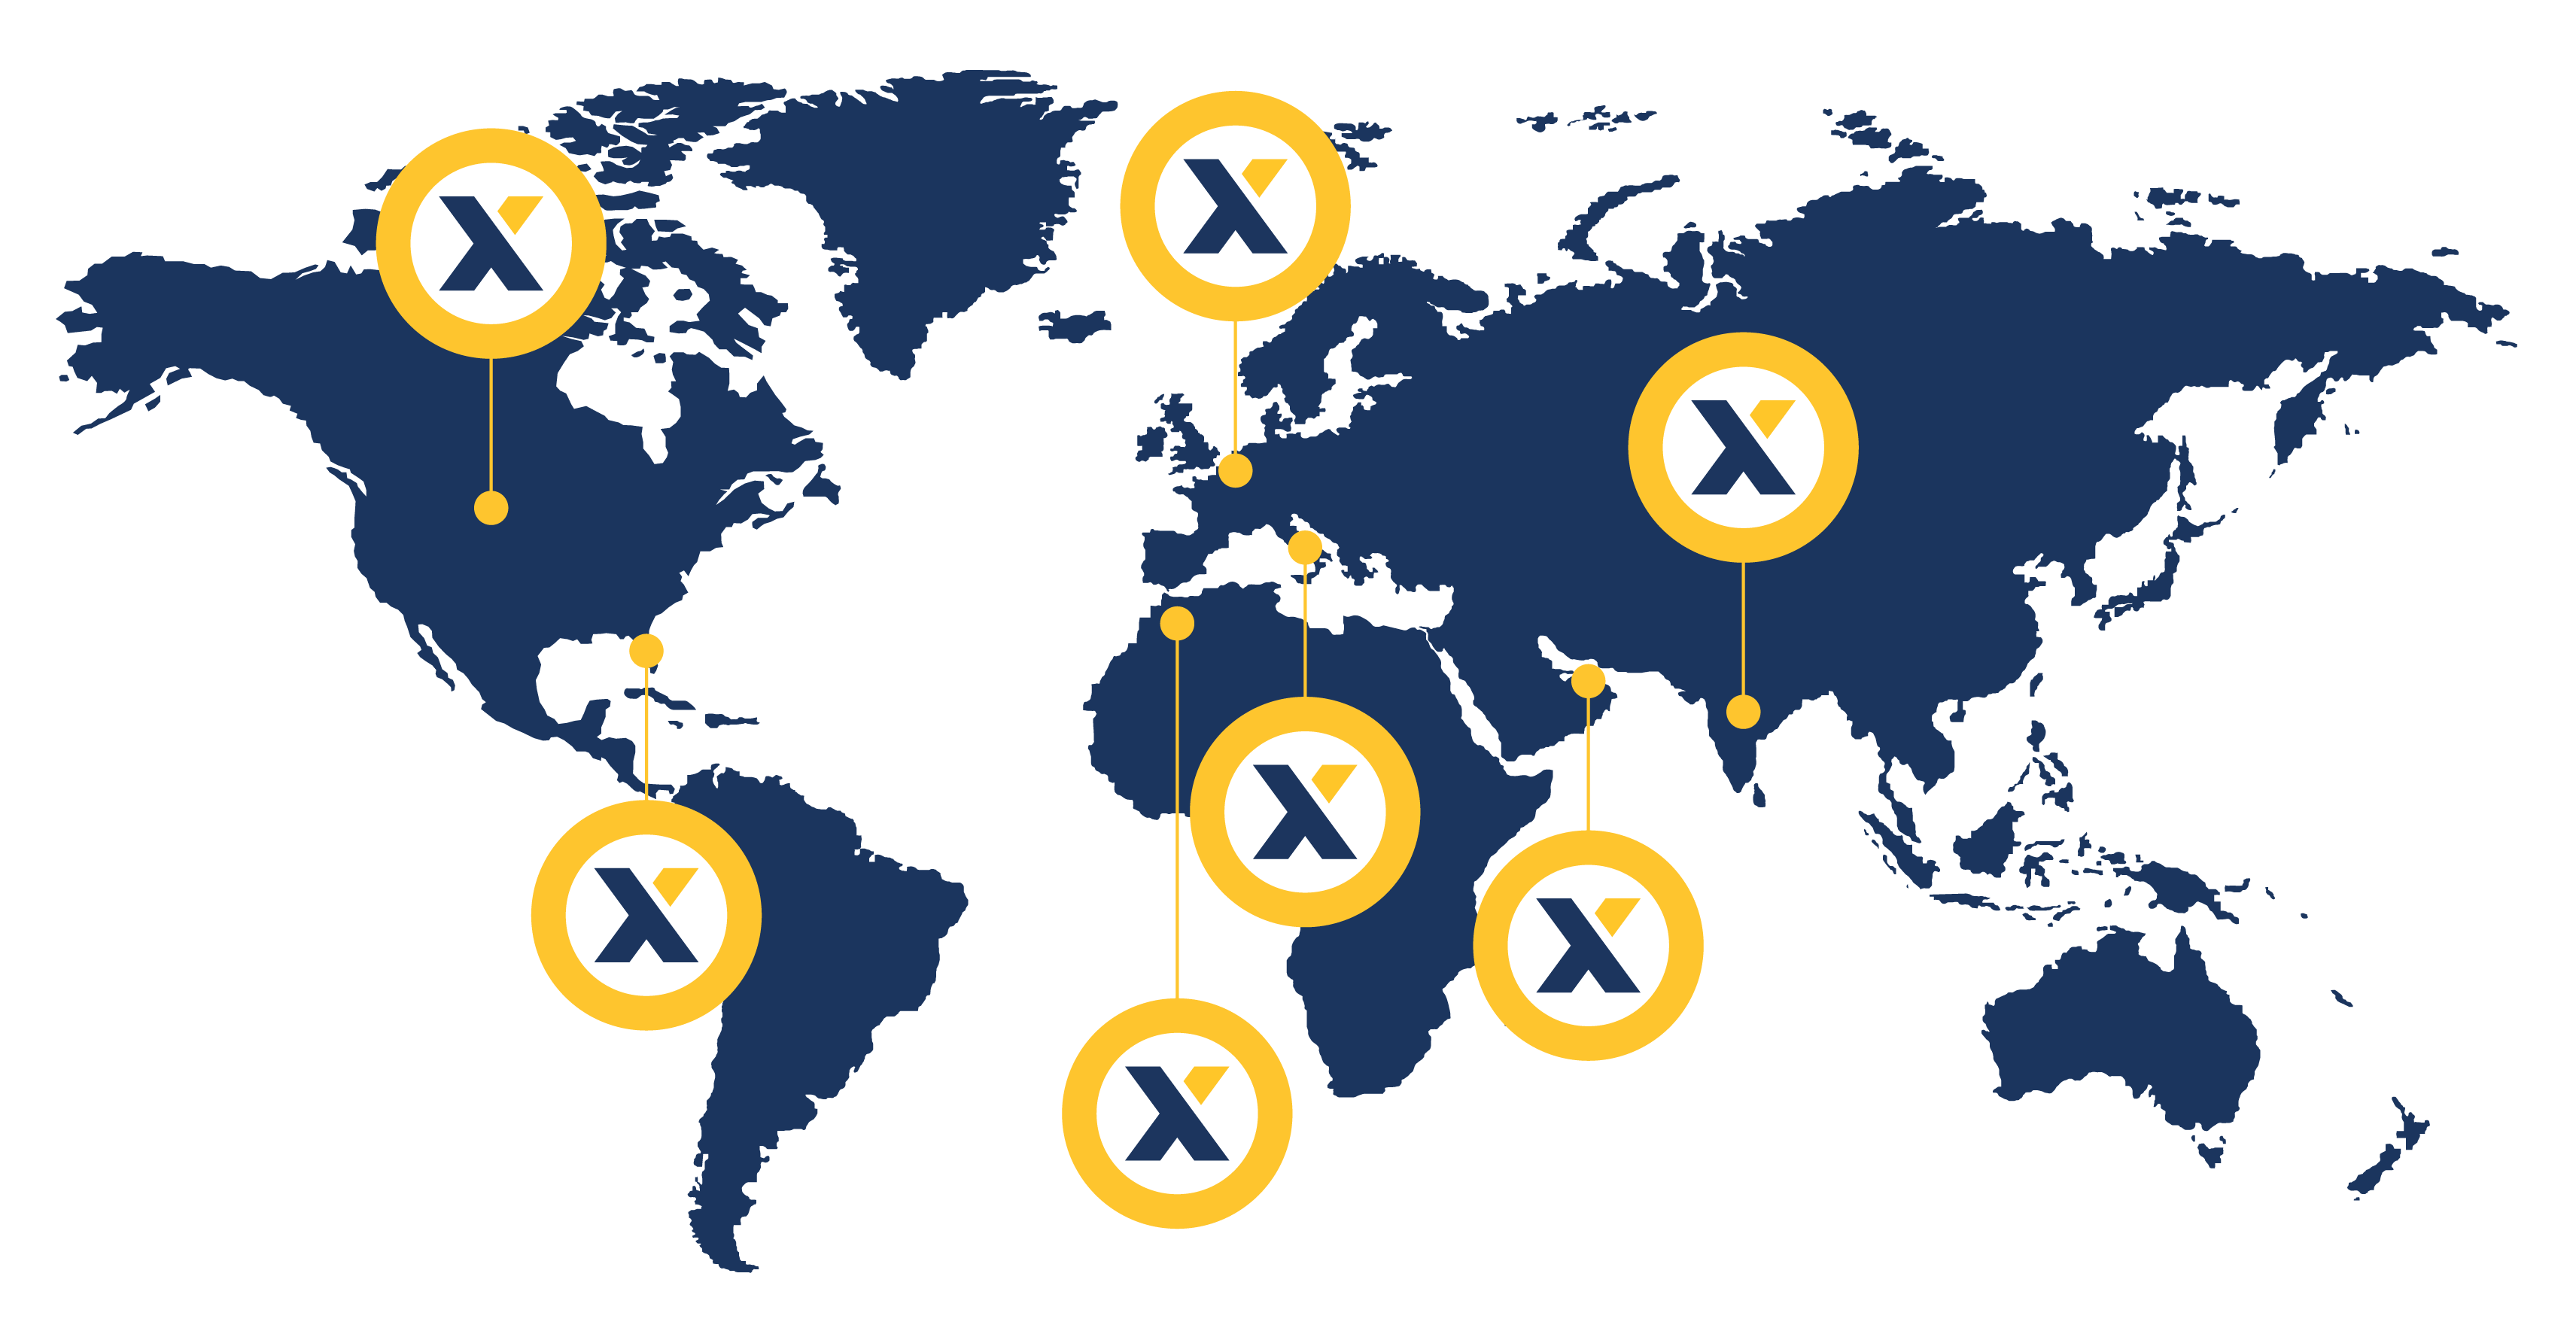 A distribution network on each continent